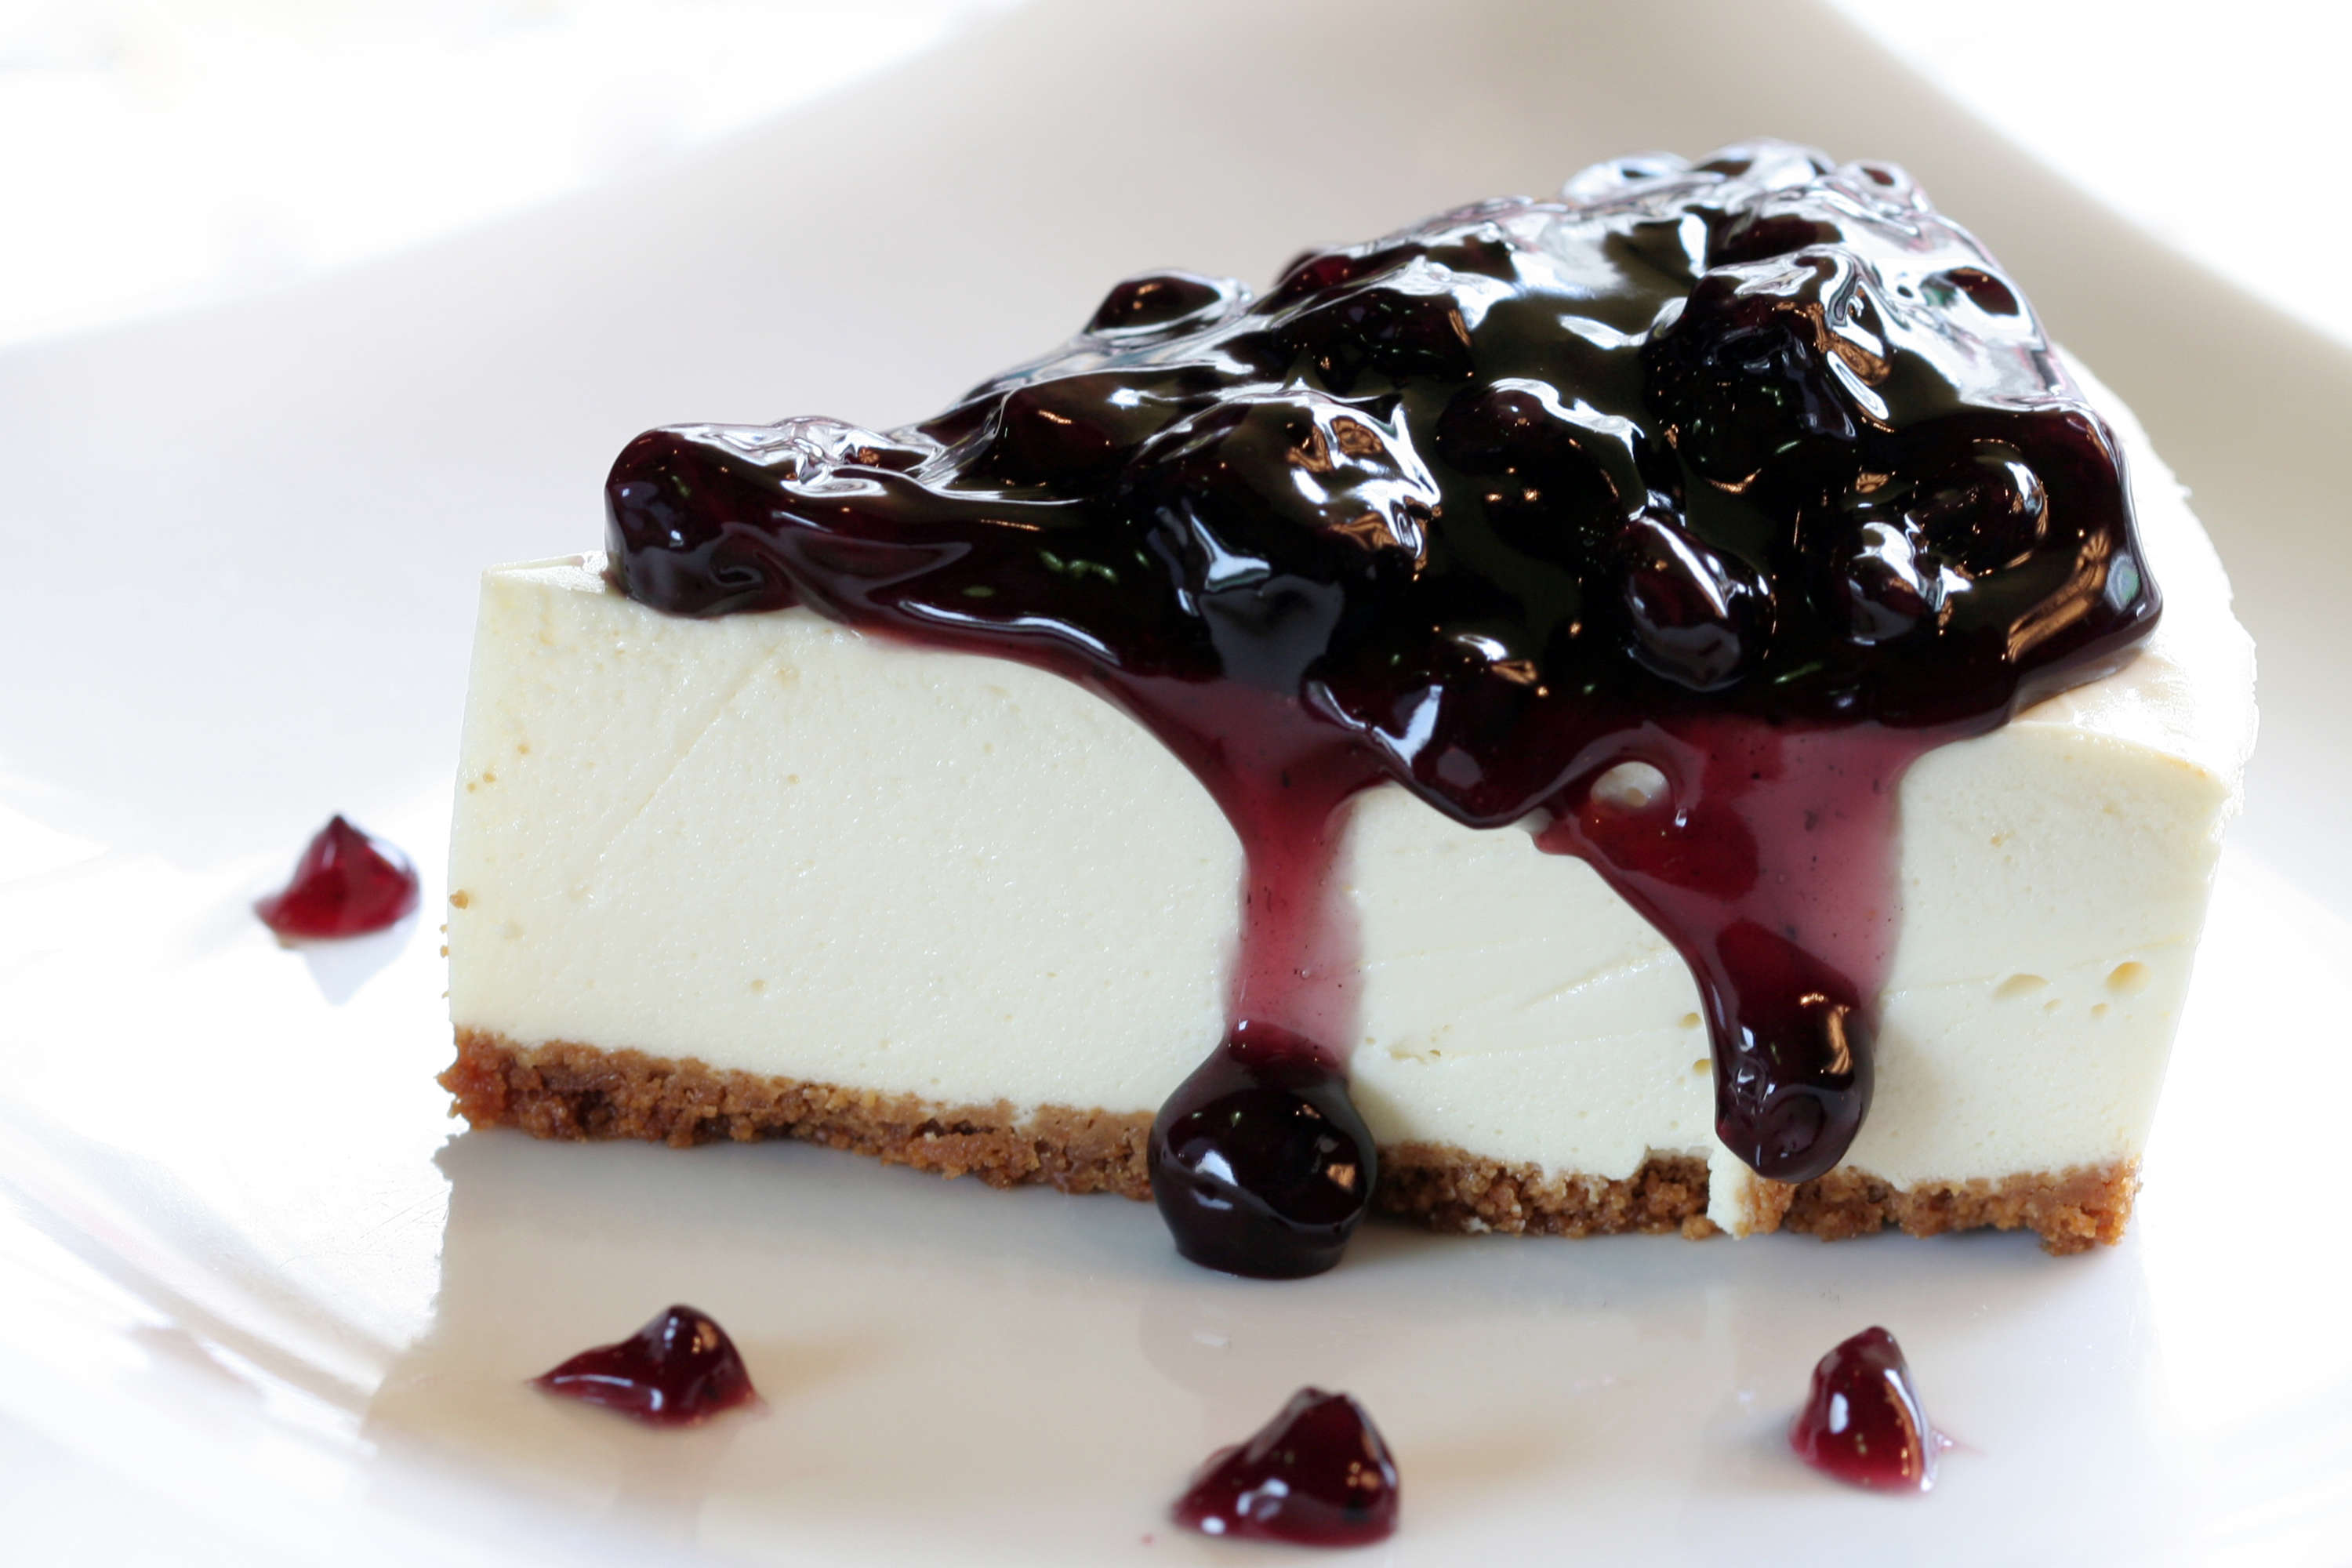 Slice of gluten-free cheesecake with blueberry topping.